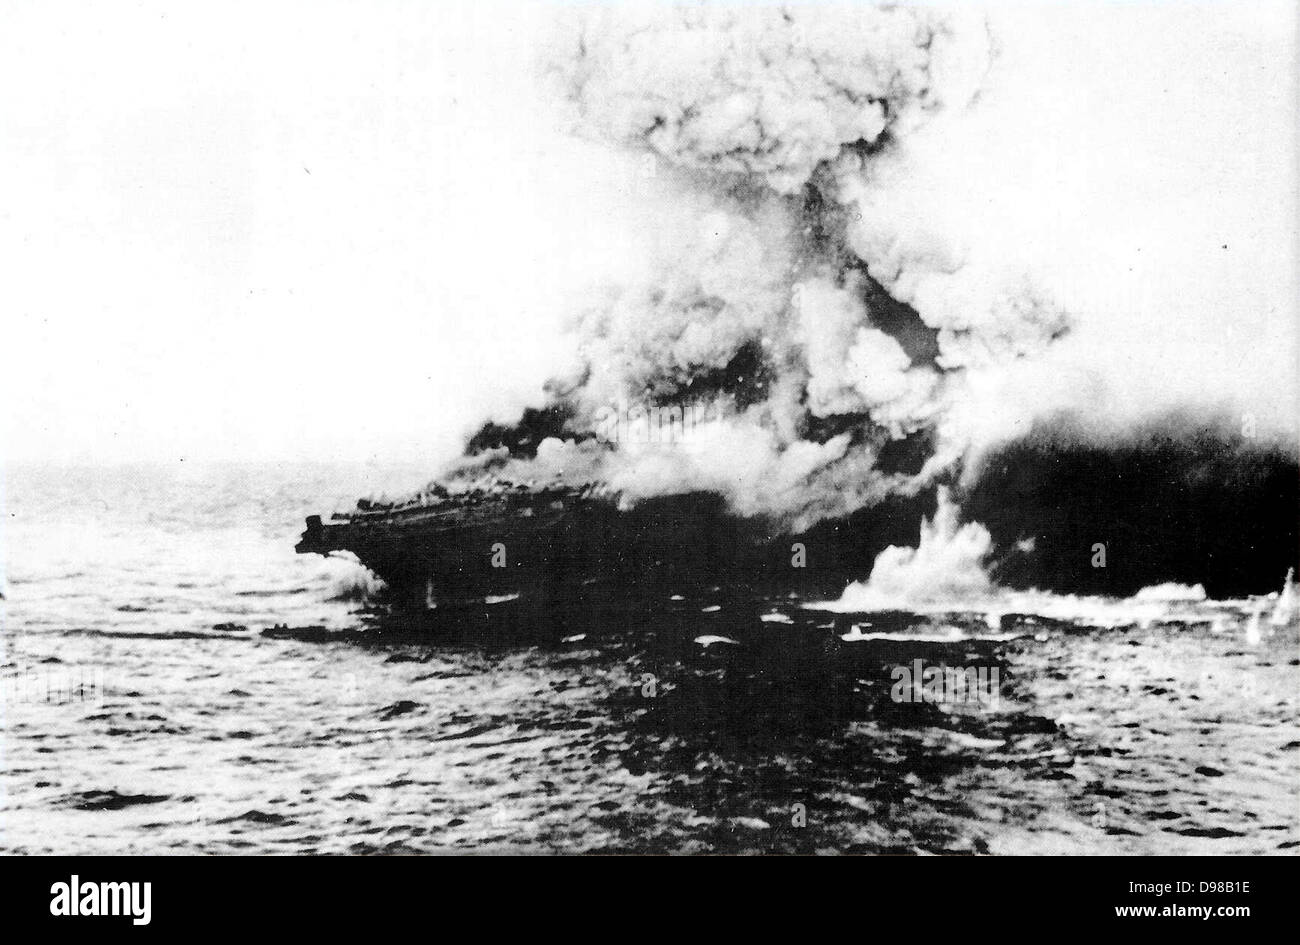 Lexington, an American aircraft carrier was sunk 7th May 1942 by torpedoes and bombs from the Japanese Navy. She first seemed to survive the bombing, but after a series of internal explosions, the ship was doomed.  The Battle of the Coral Sea Stock Photo